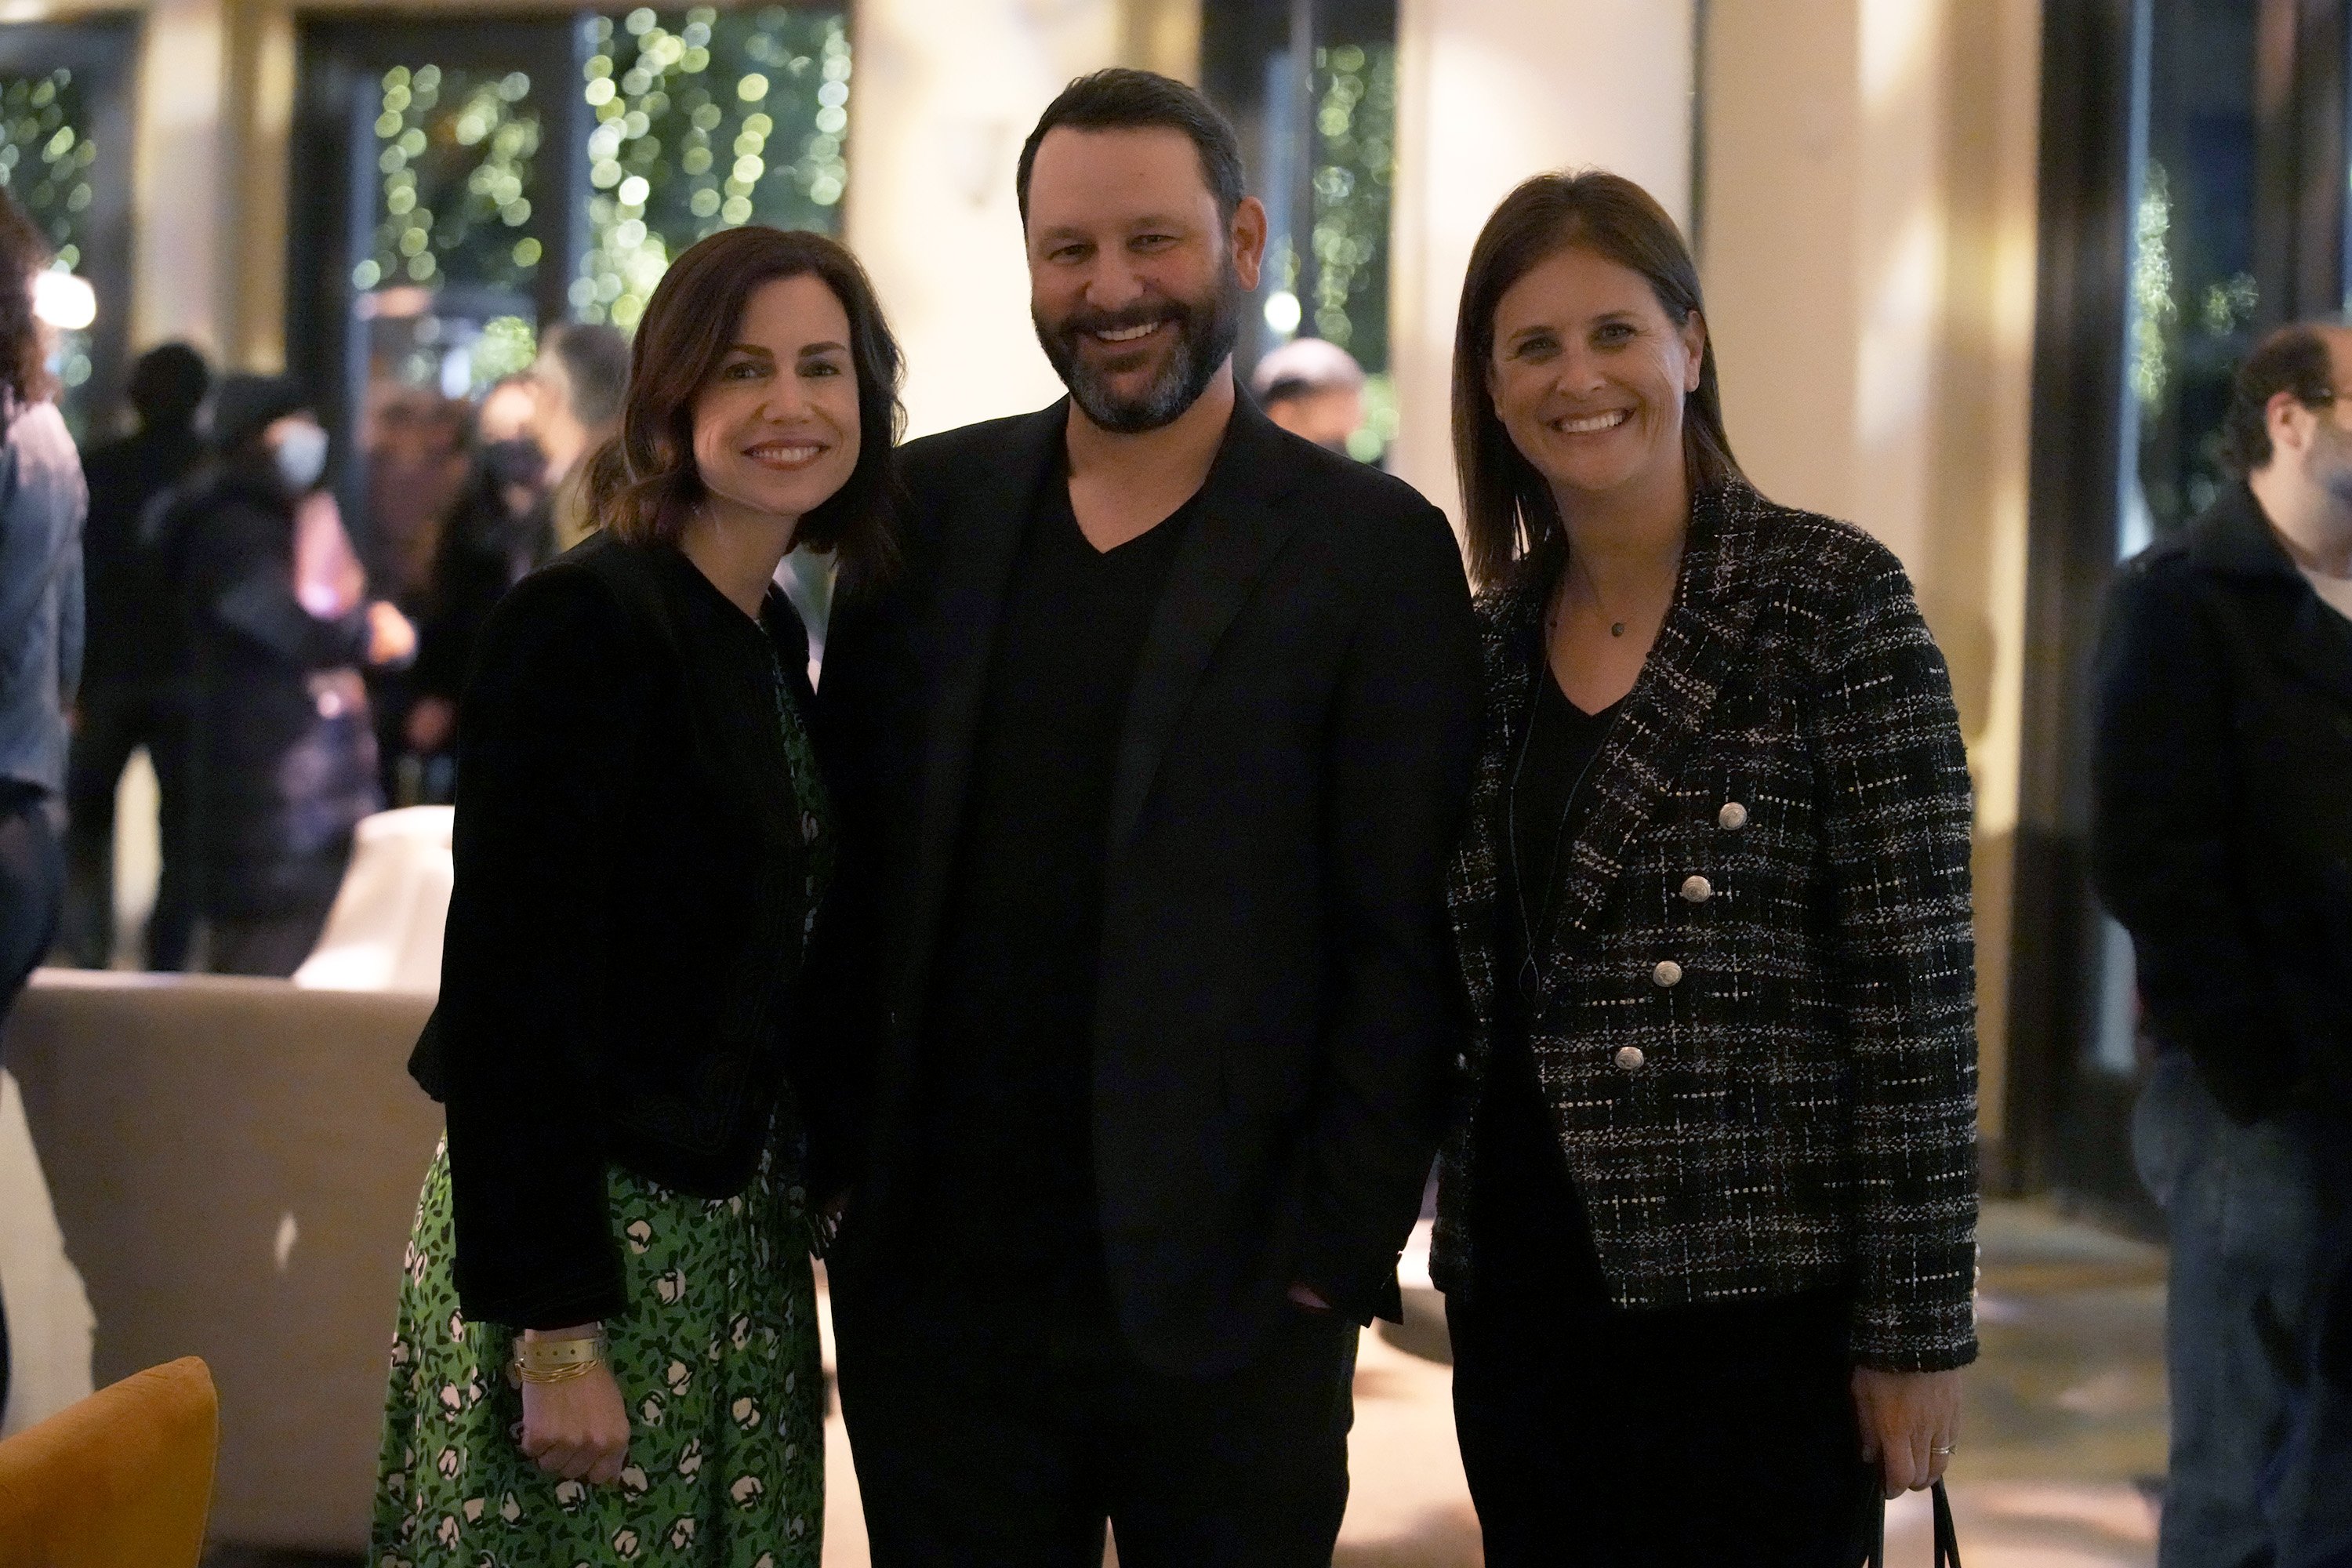 This Is Us Season 6 Red Carpet, December 14th, 2021 in Los Angeles -- Pictured: Carolyn Cassidy, Dan Fogelman, Lisa Katz. | Source: Getty Images